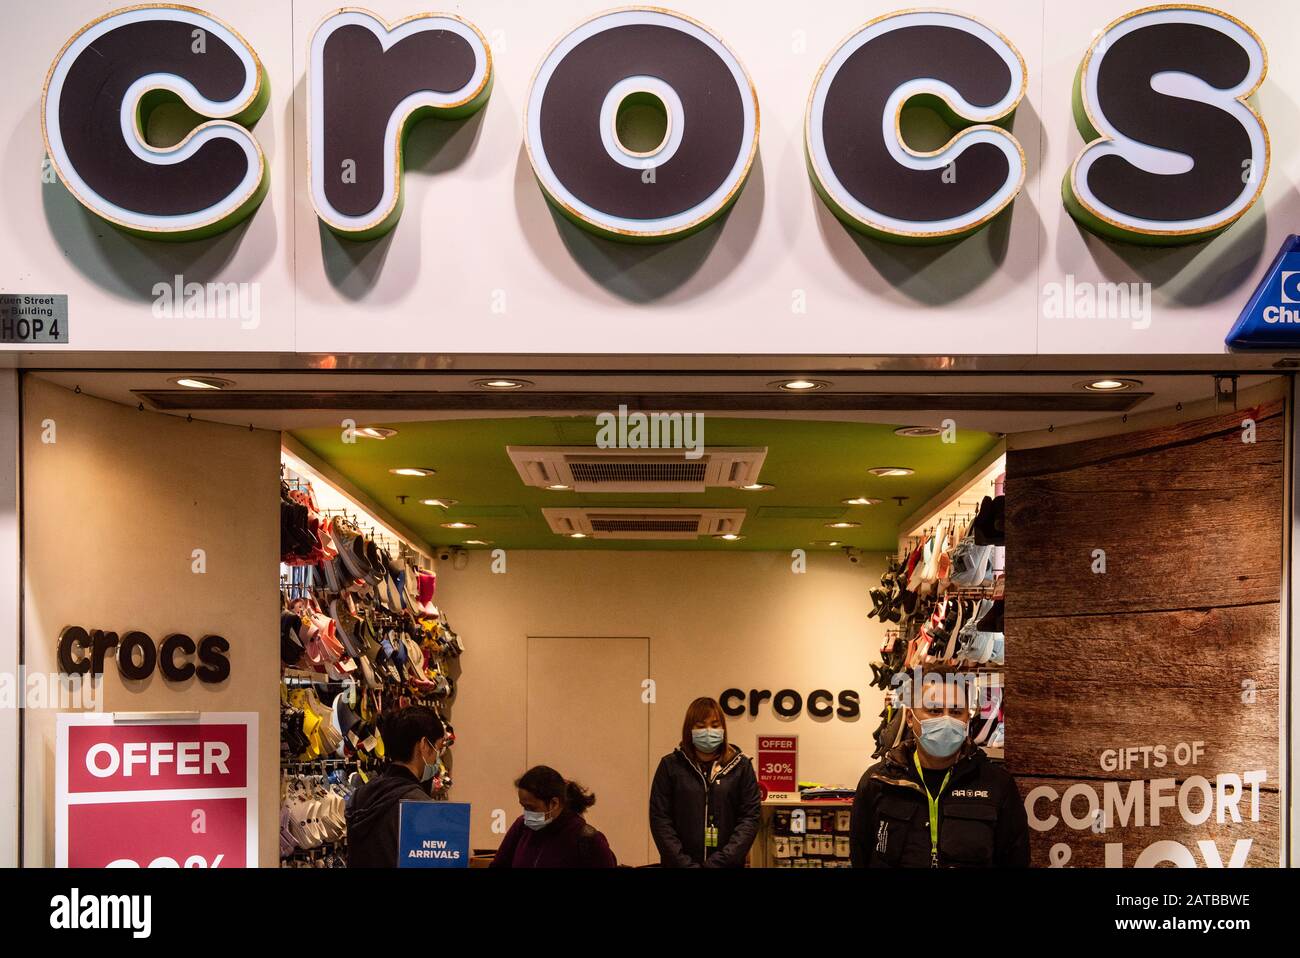 where is the crocs store